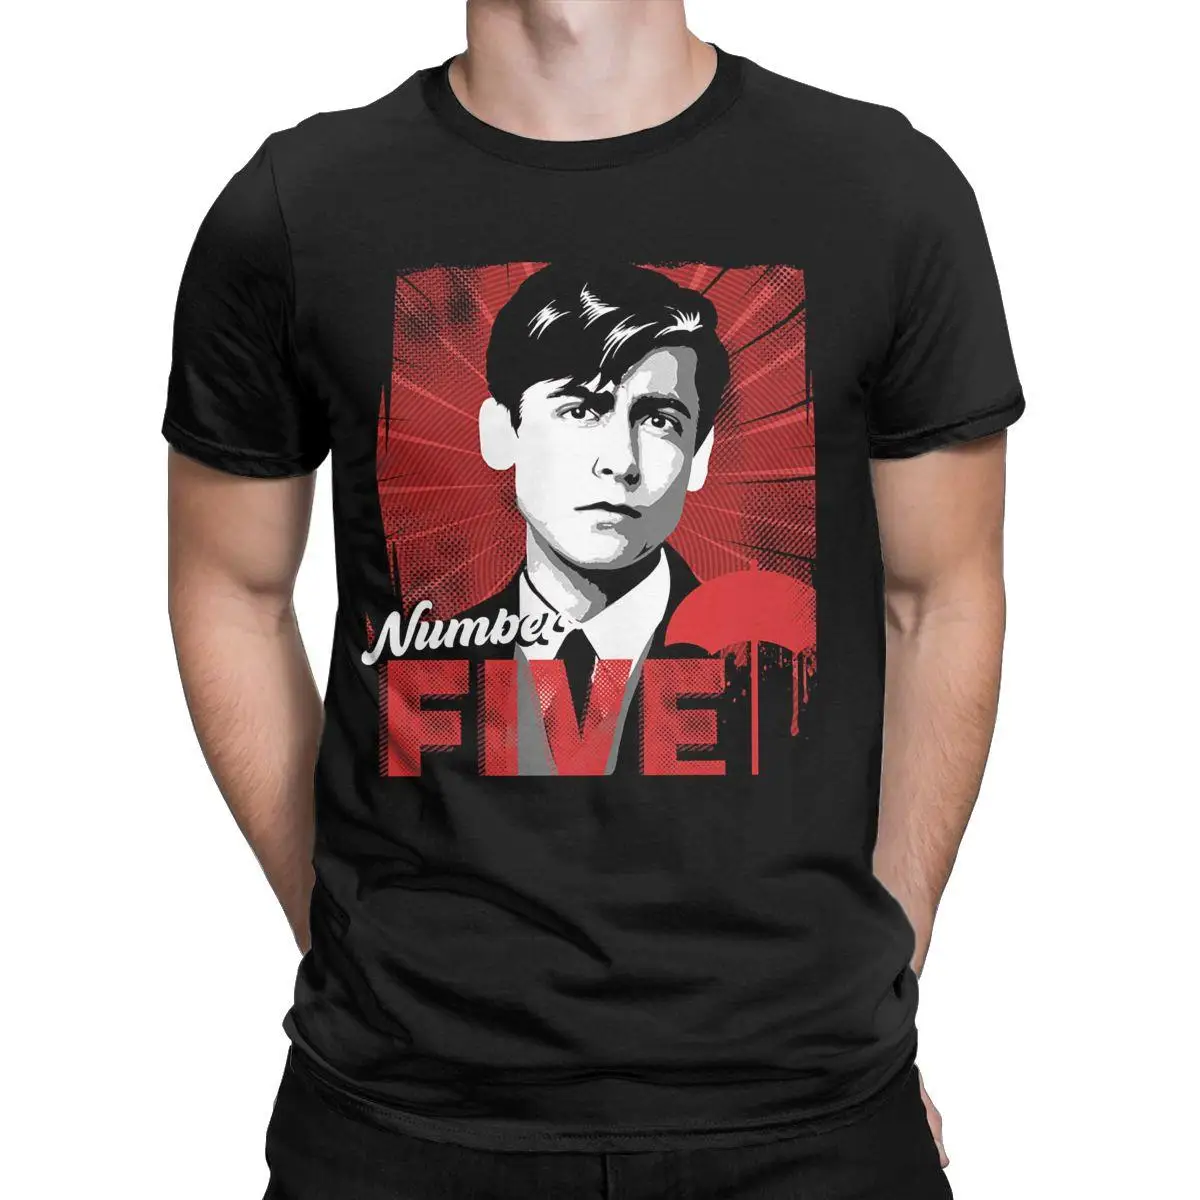 

Men's Number 5 The Umbrella Academy T Shirt Pure Cotton Clothing Awesome Short Sleeve Crewneck Tees Plus Size T-Shirt